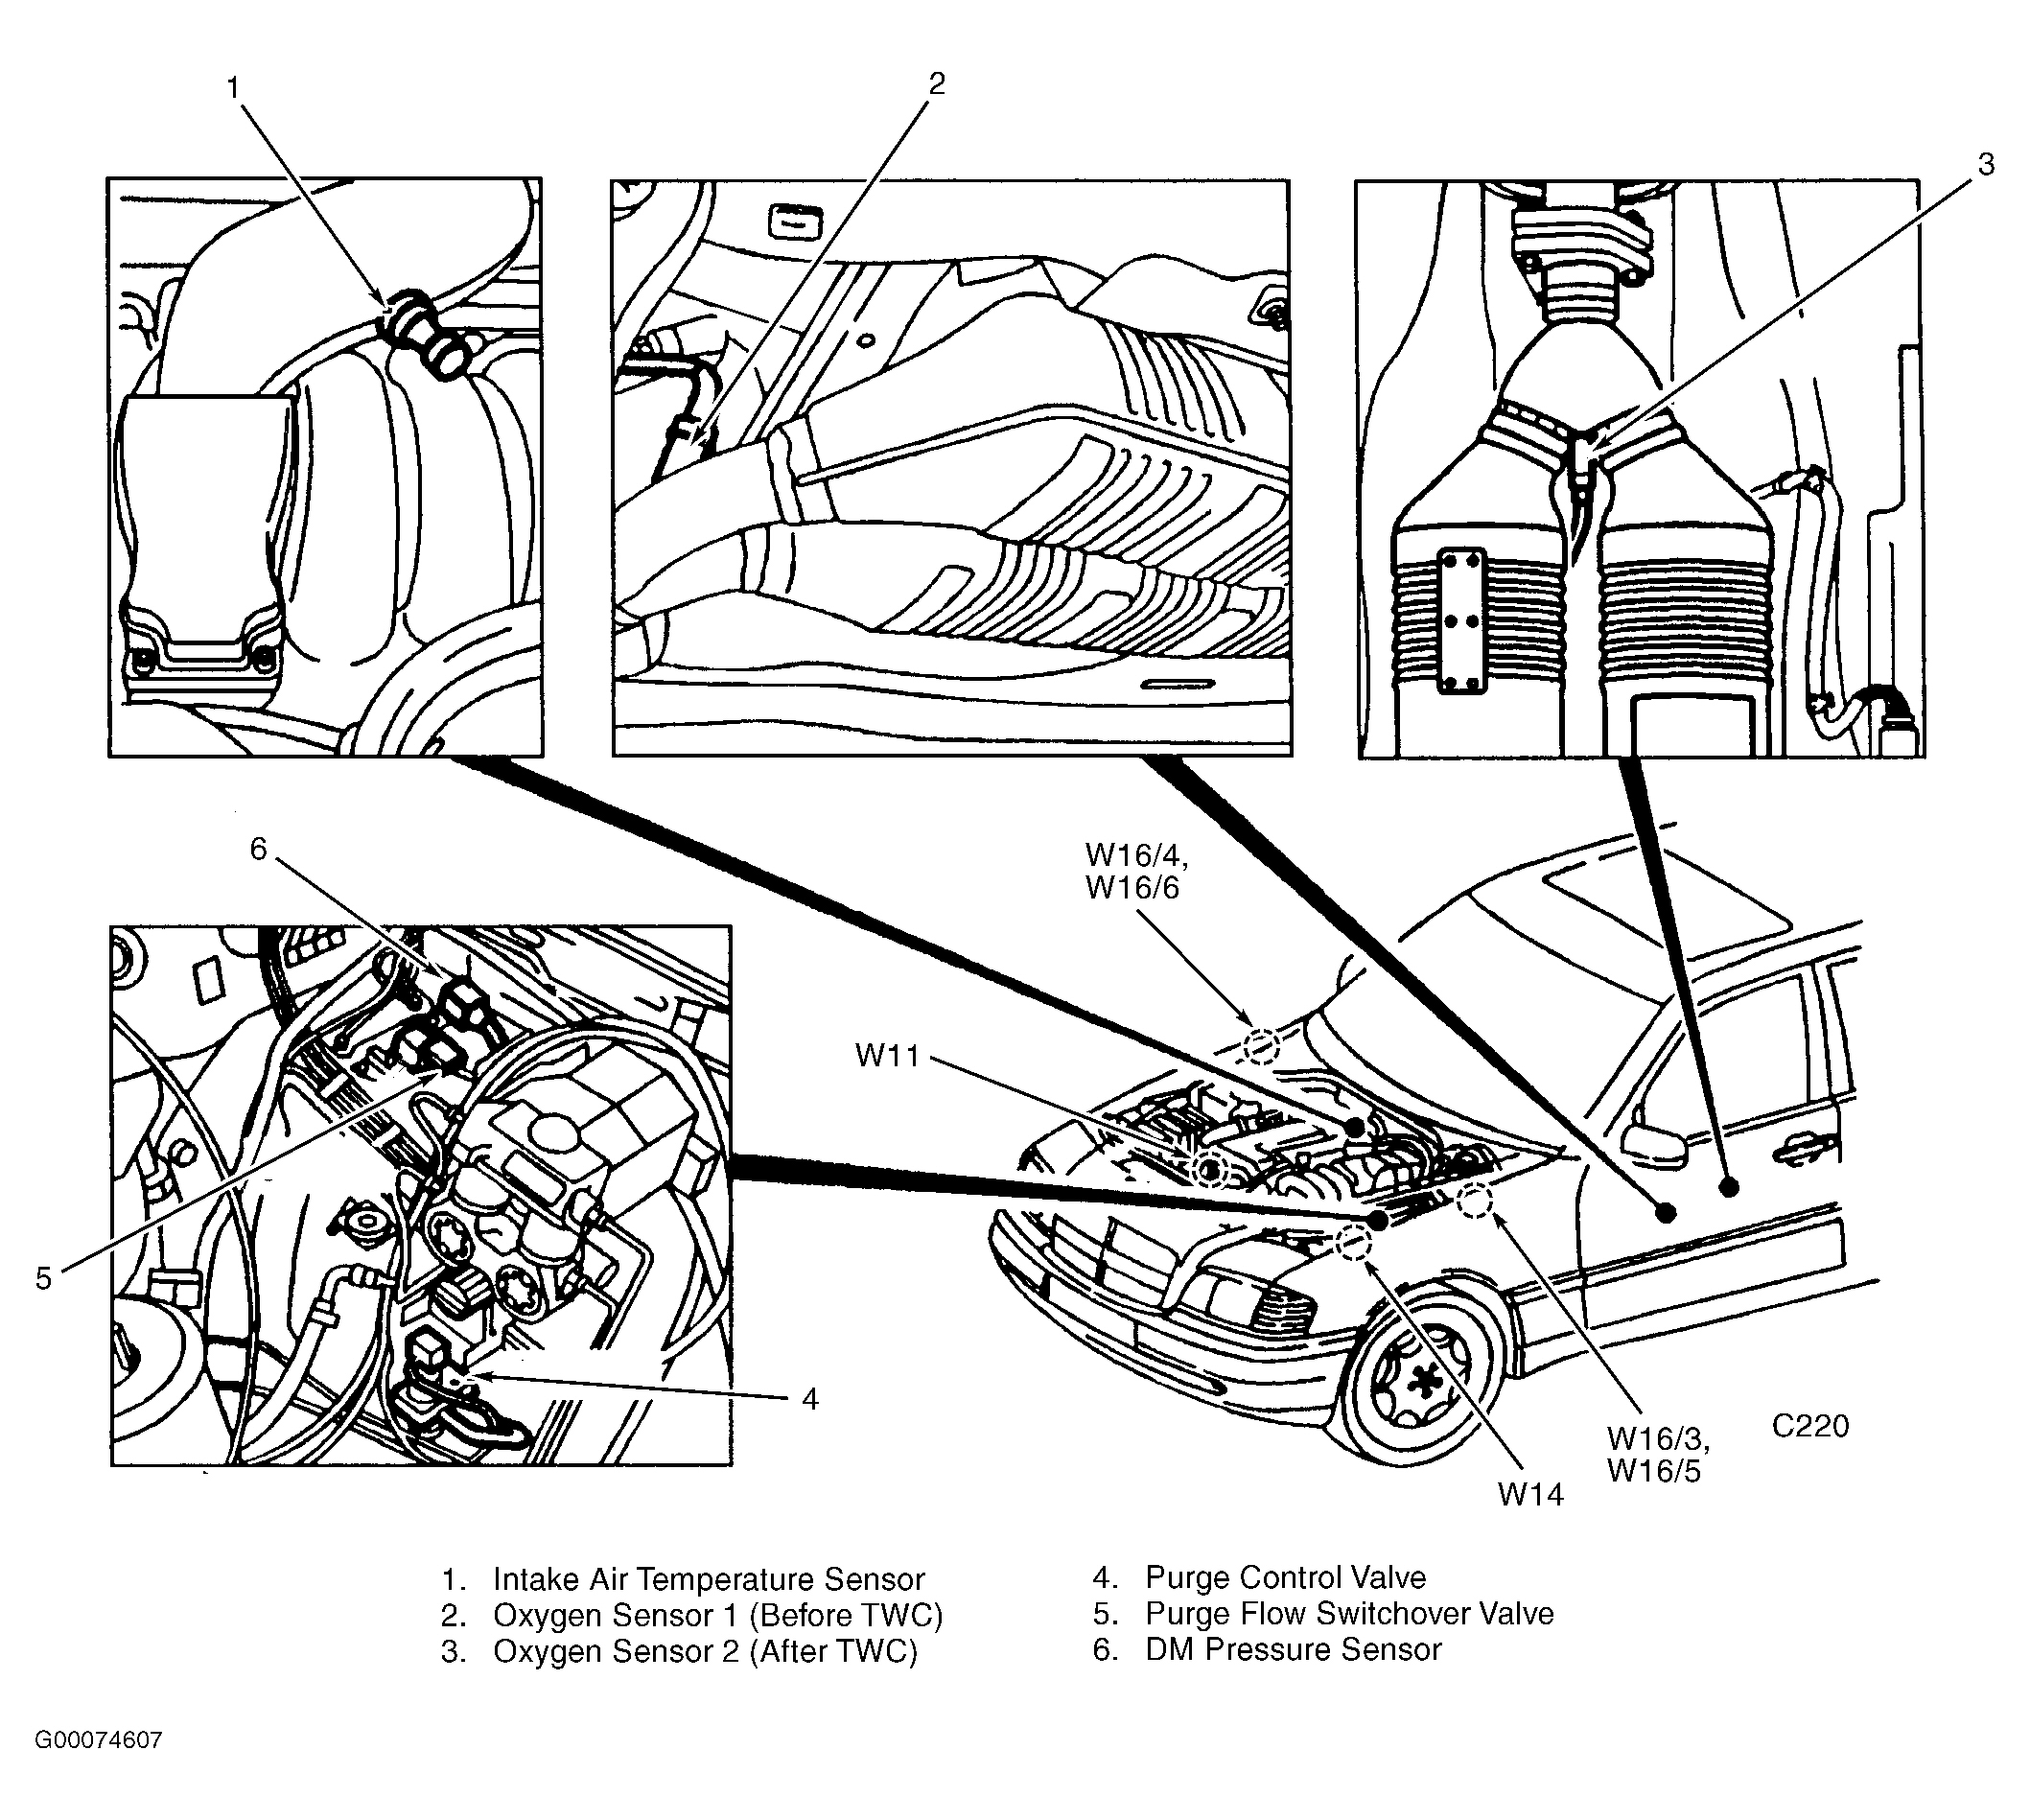 Mercedes-Benz C220 1996 - Component Locations -  Front Of Vehicle (C220)